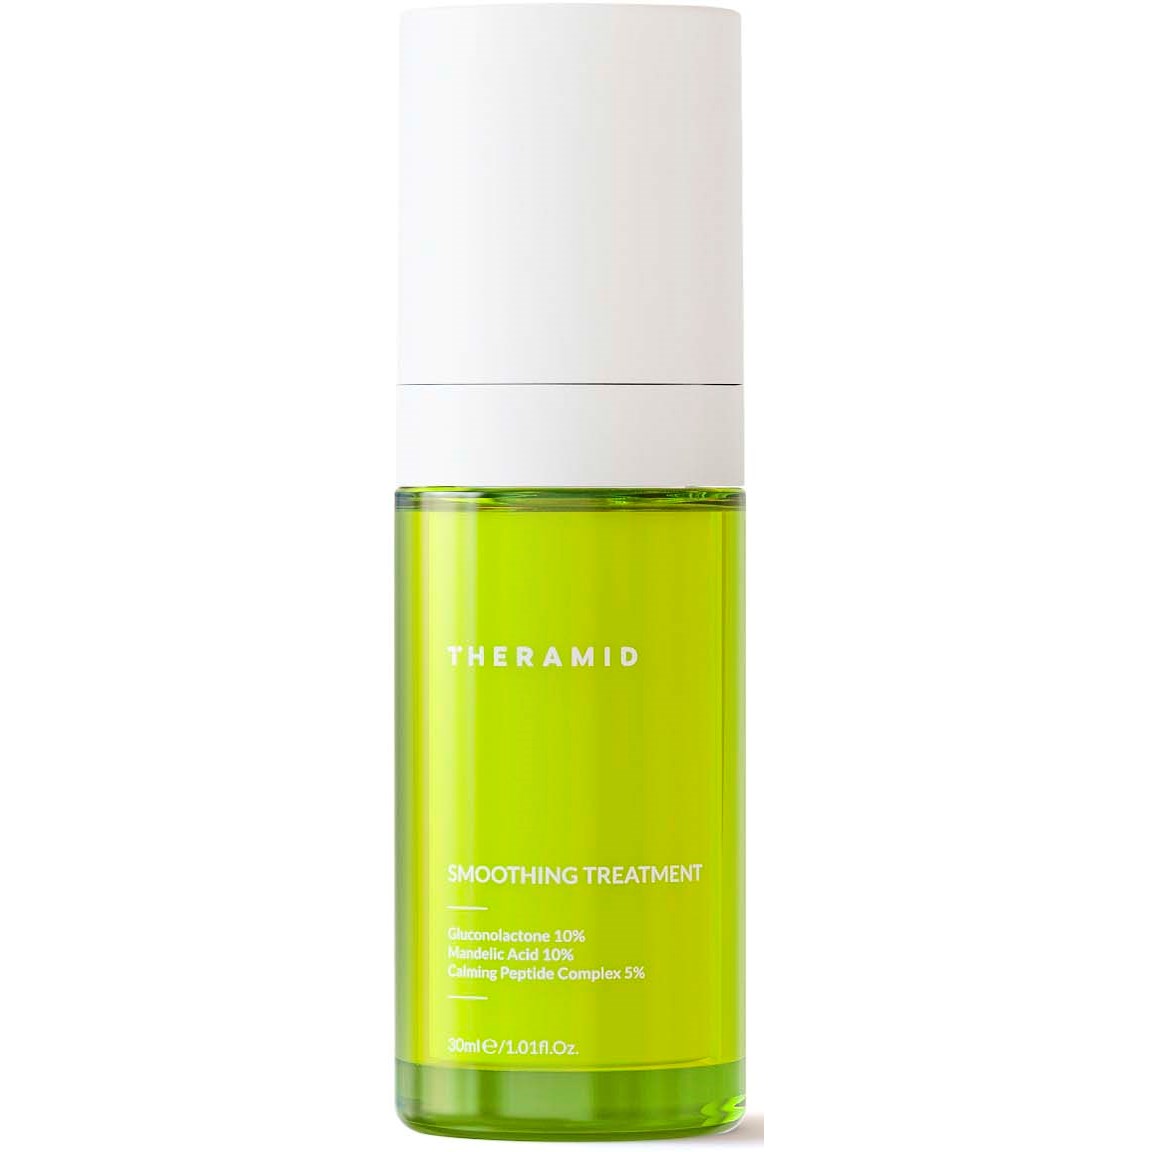 Theramid Smoothing Treatment Anti-Aging Treatment With Mild Acids For